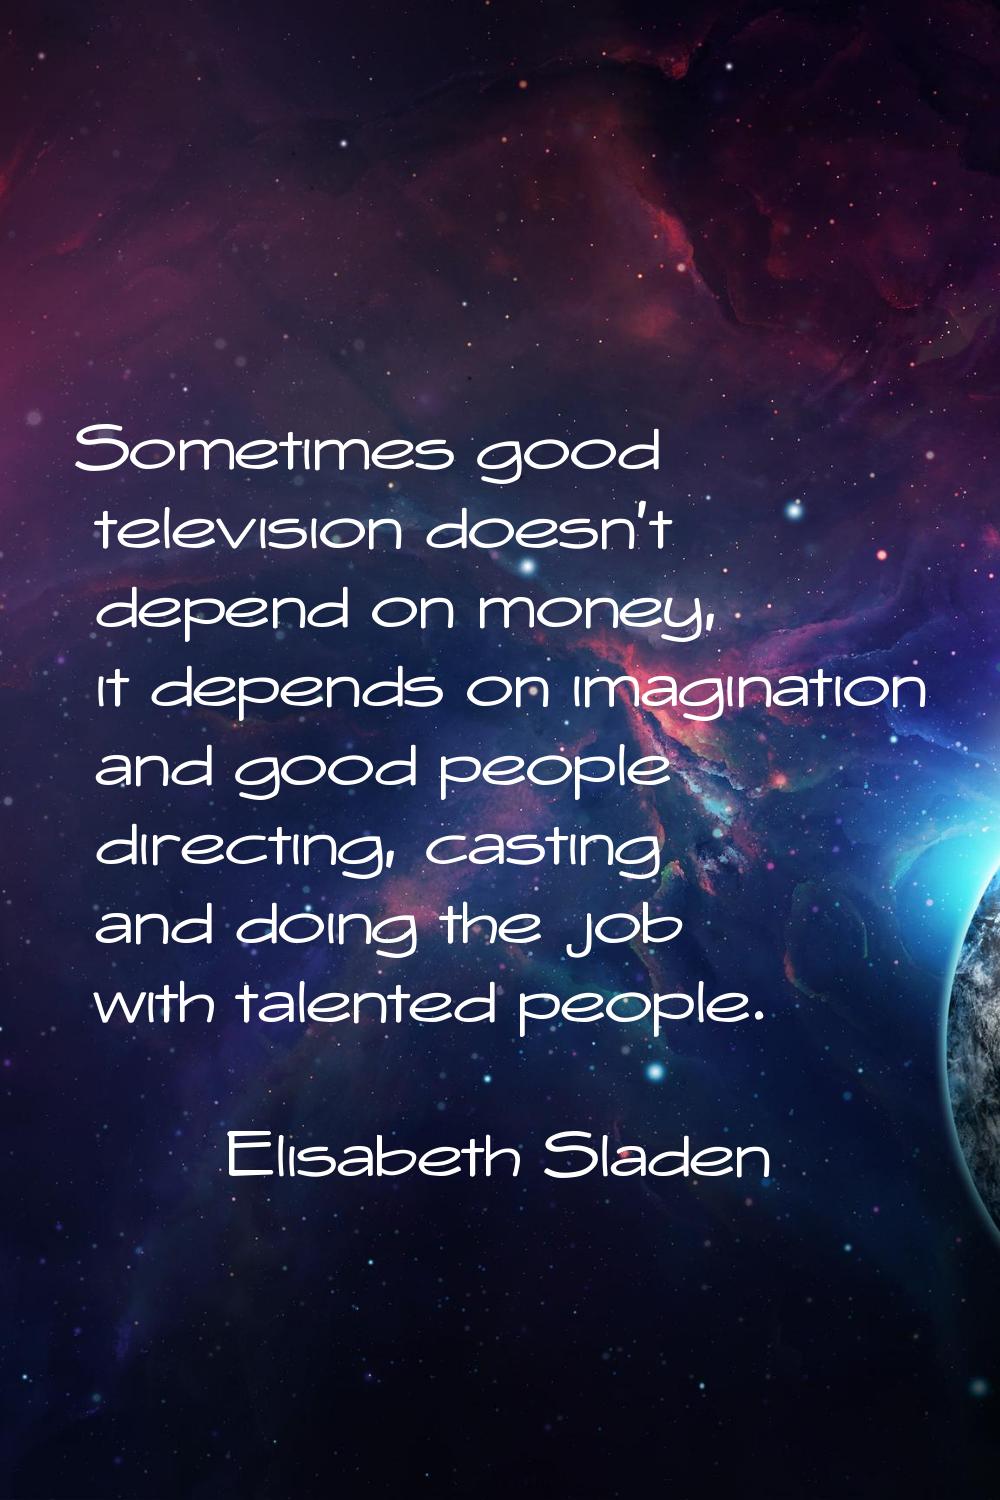 Sometimes good television doesn't depend on money, it depends on imagination and good people direct